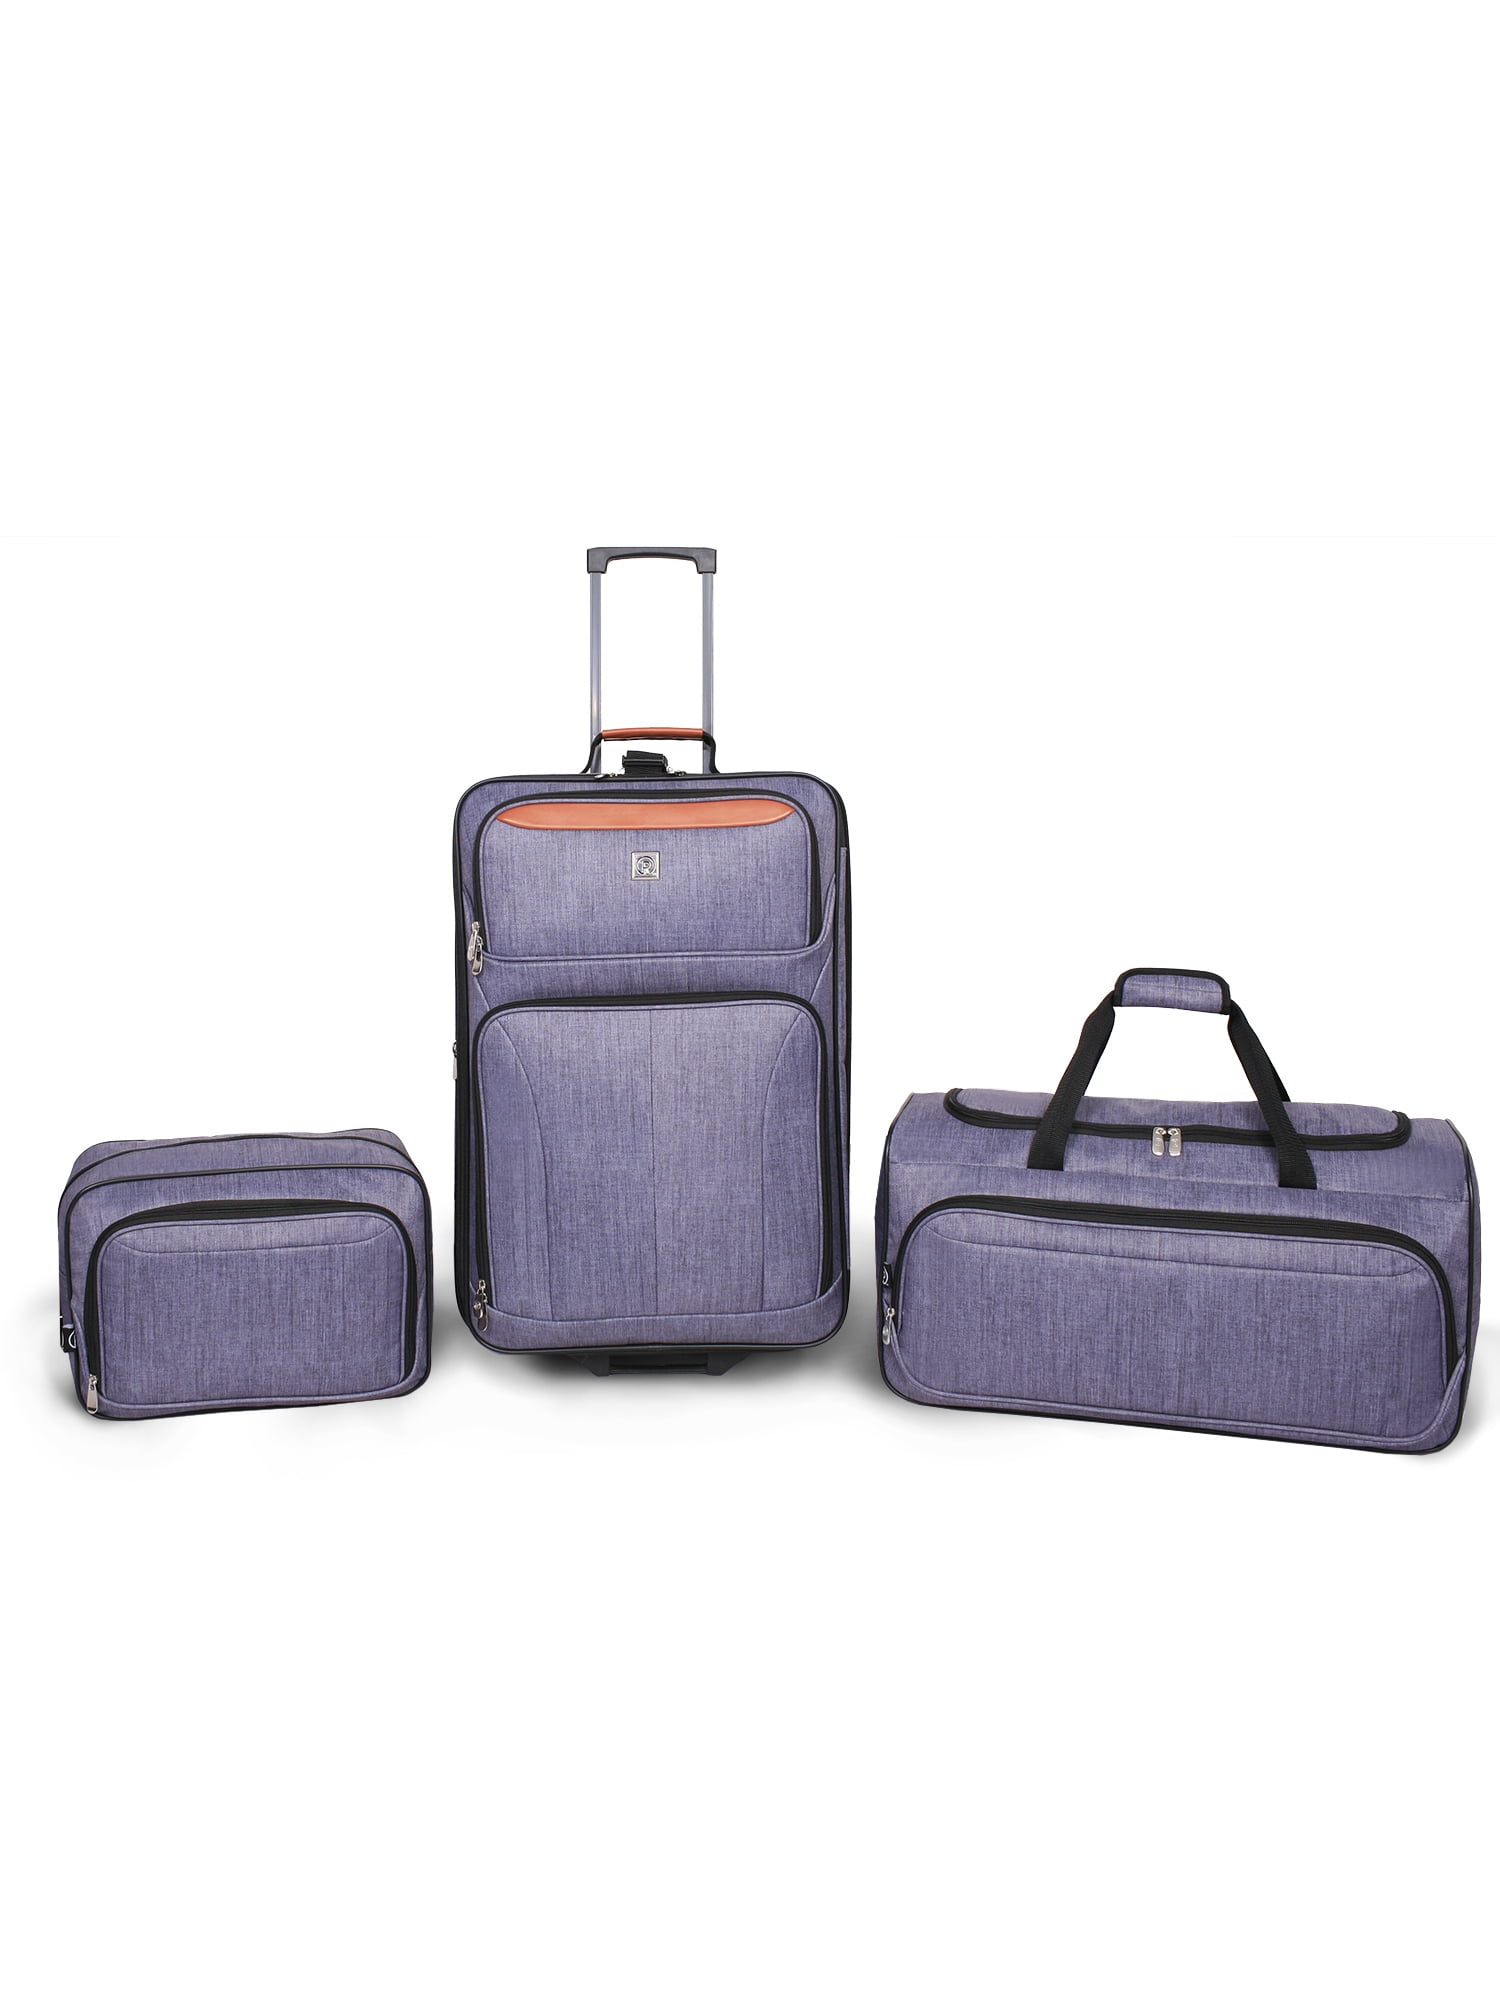 3pc Iridescent Travel Set- Tote, Duffle, and Wristlet – Far Above Rubies